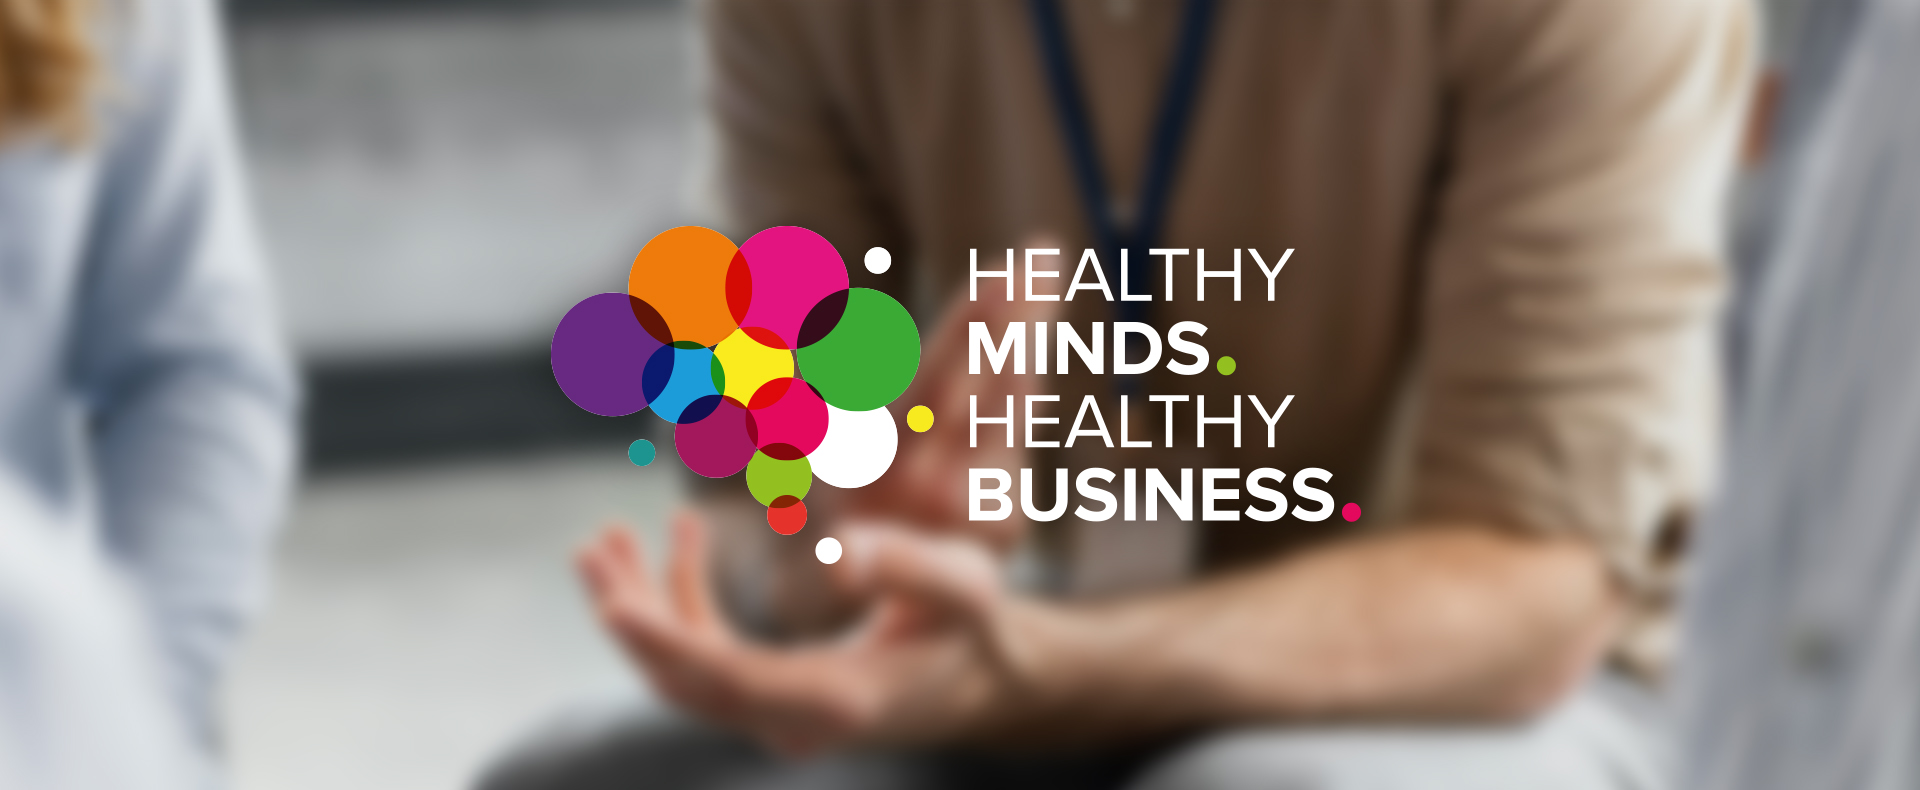 Healthy Minds Healthy Business